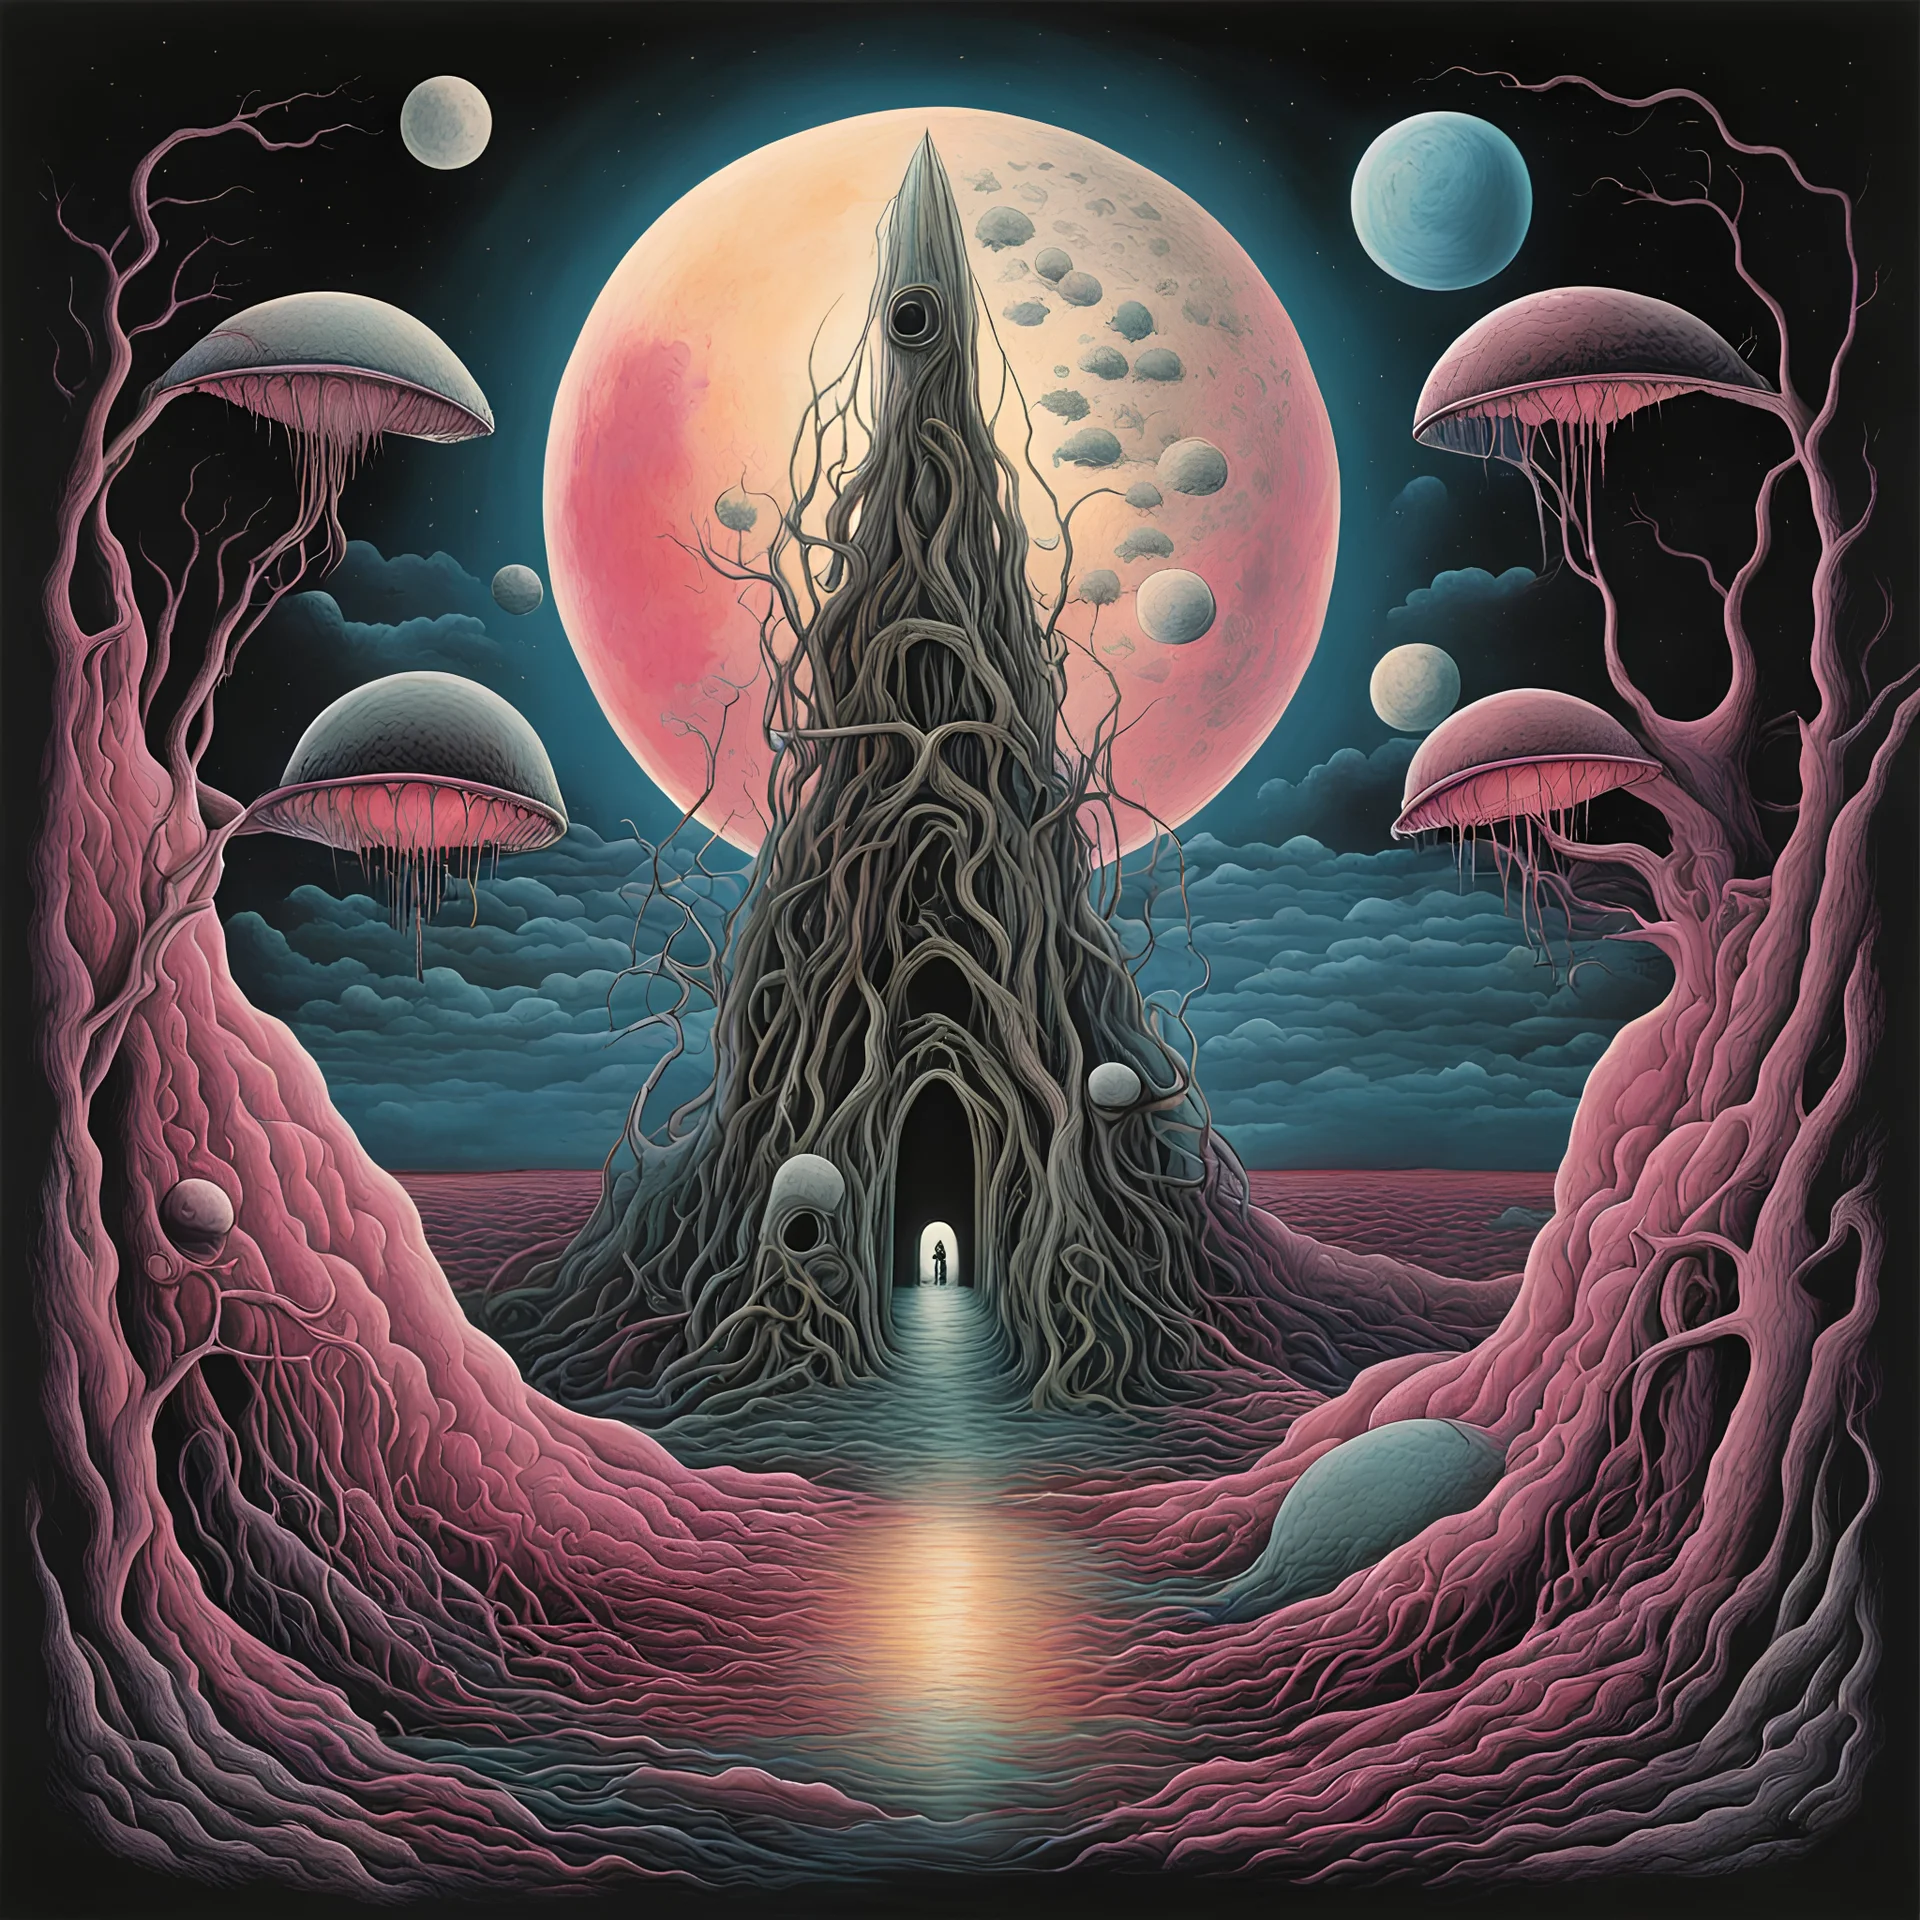 Prog rock album cover art, embryonic moon gloom, strange gurgling whisper low, morbid, surrealism, creepy, artistic, by Wotto, bright vivid colors, cel shaded, existential angst, sharp focus, sinister, by Pink floyd